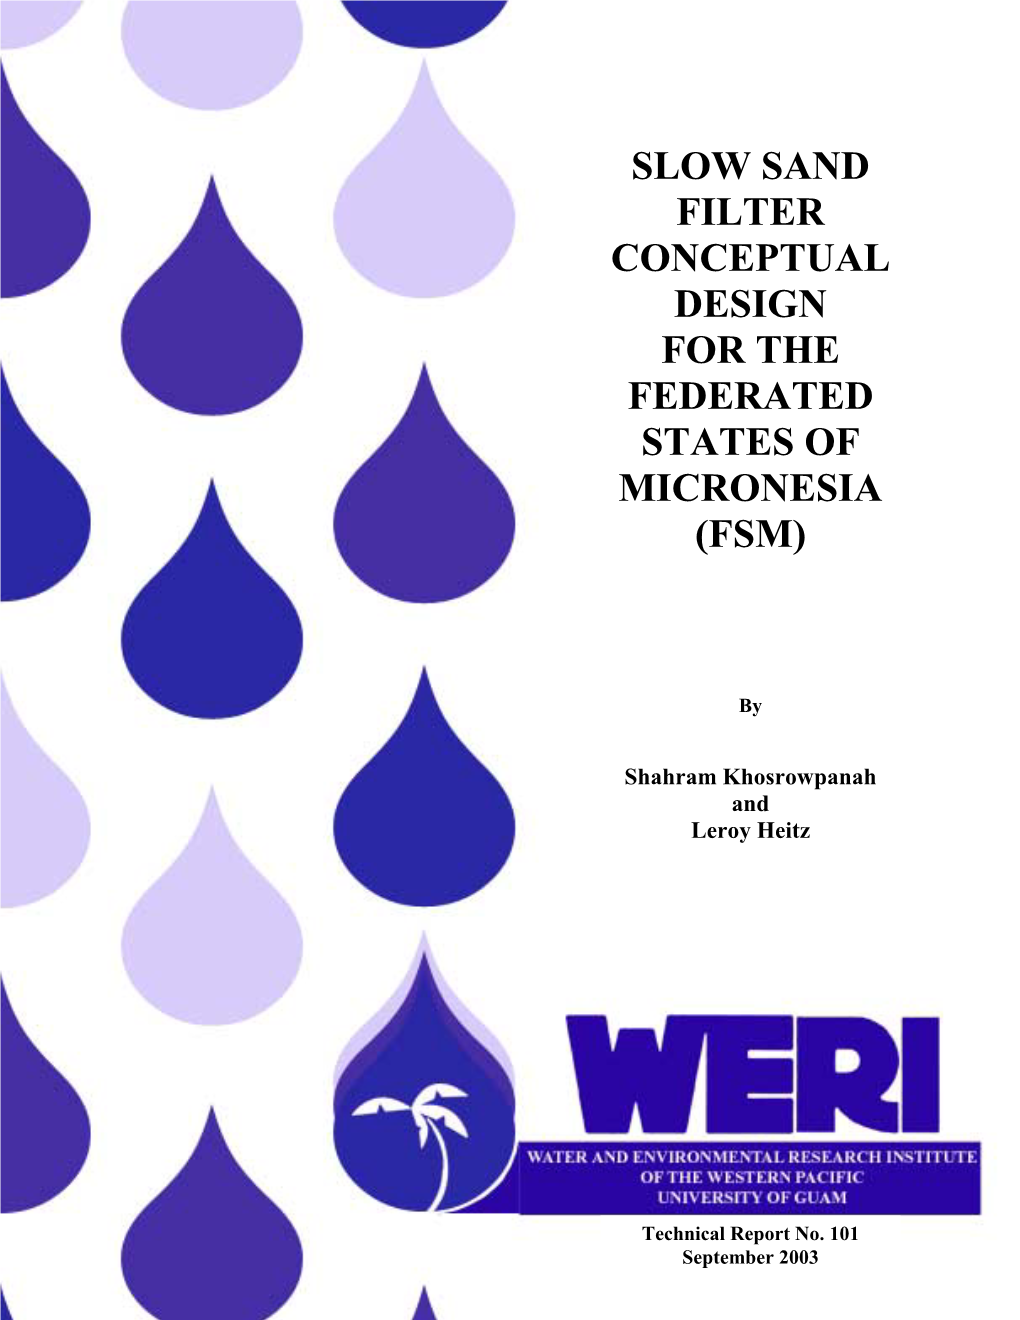 Slow Sand Filter Conceptual Design for the Federated Ststes of Micronesia